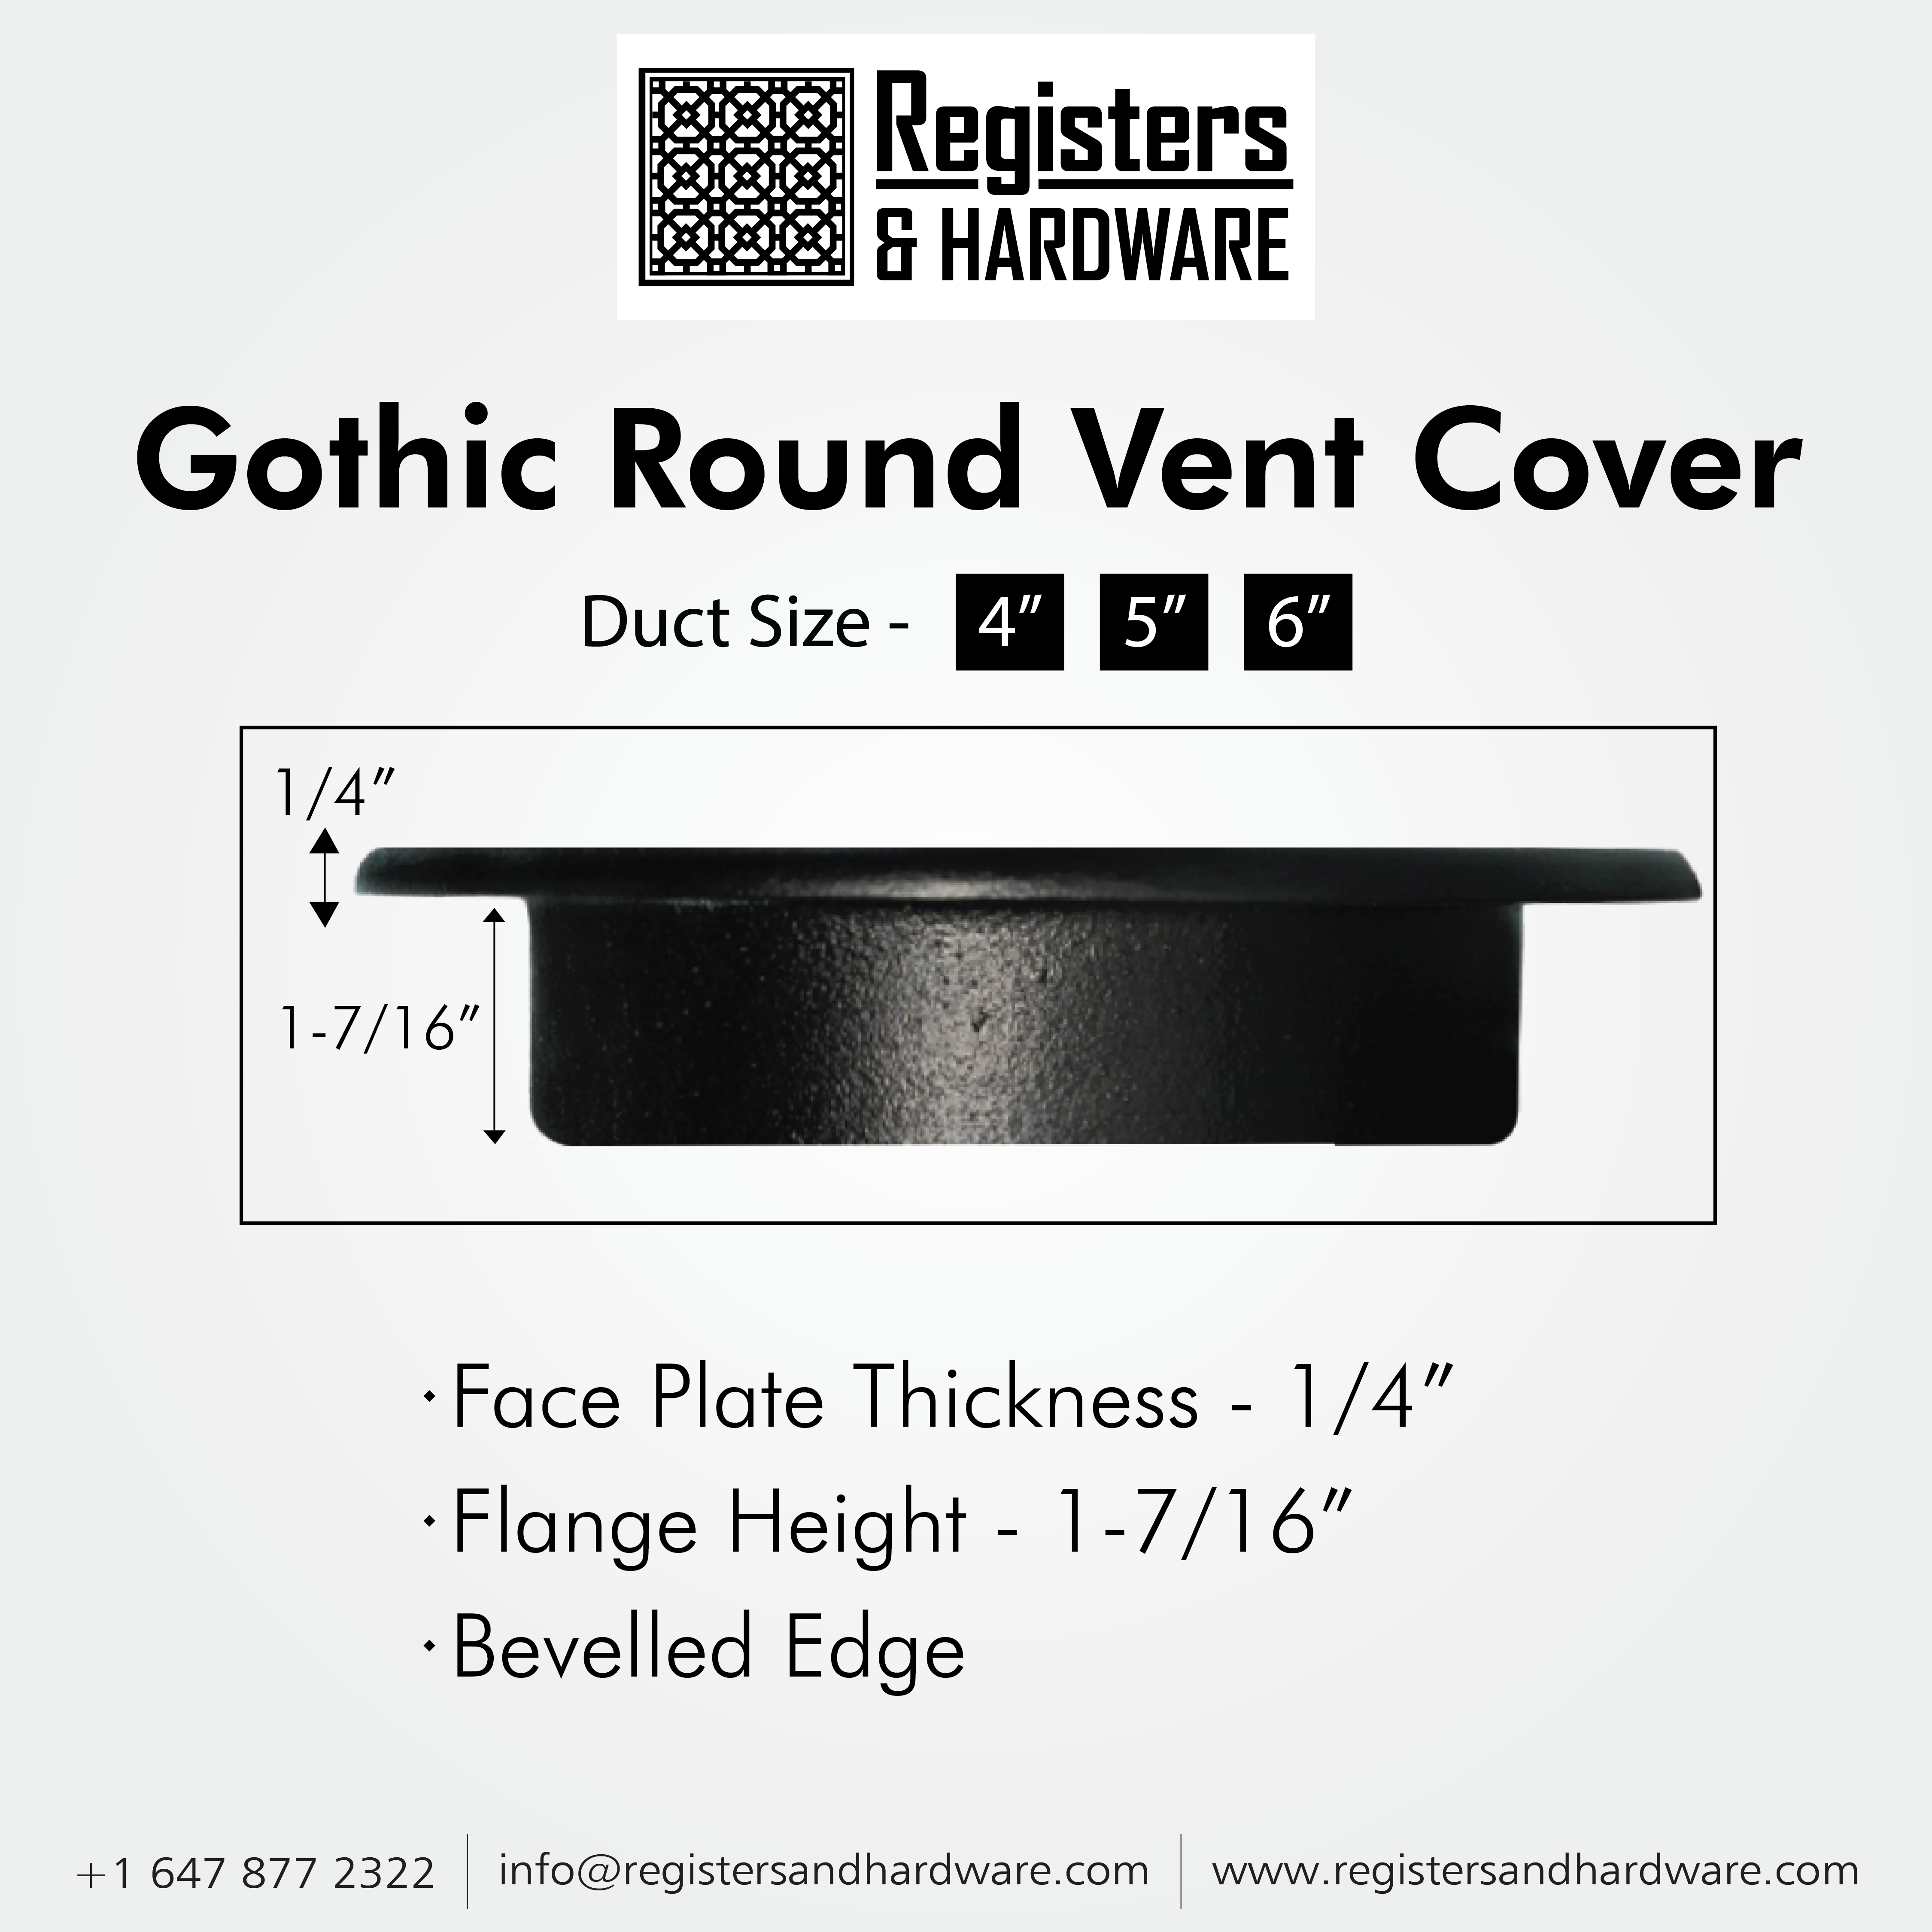 Spooky Gothic Round Vent cover 4" Duct Opening (Overall 5-1/2") in Spider Web Design | Solid Cast Aluminium Register Cover | Powder Coated